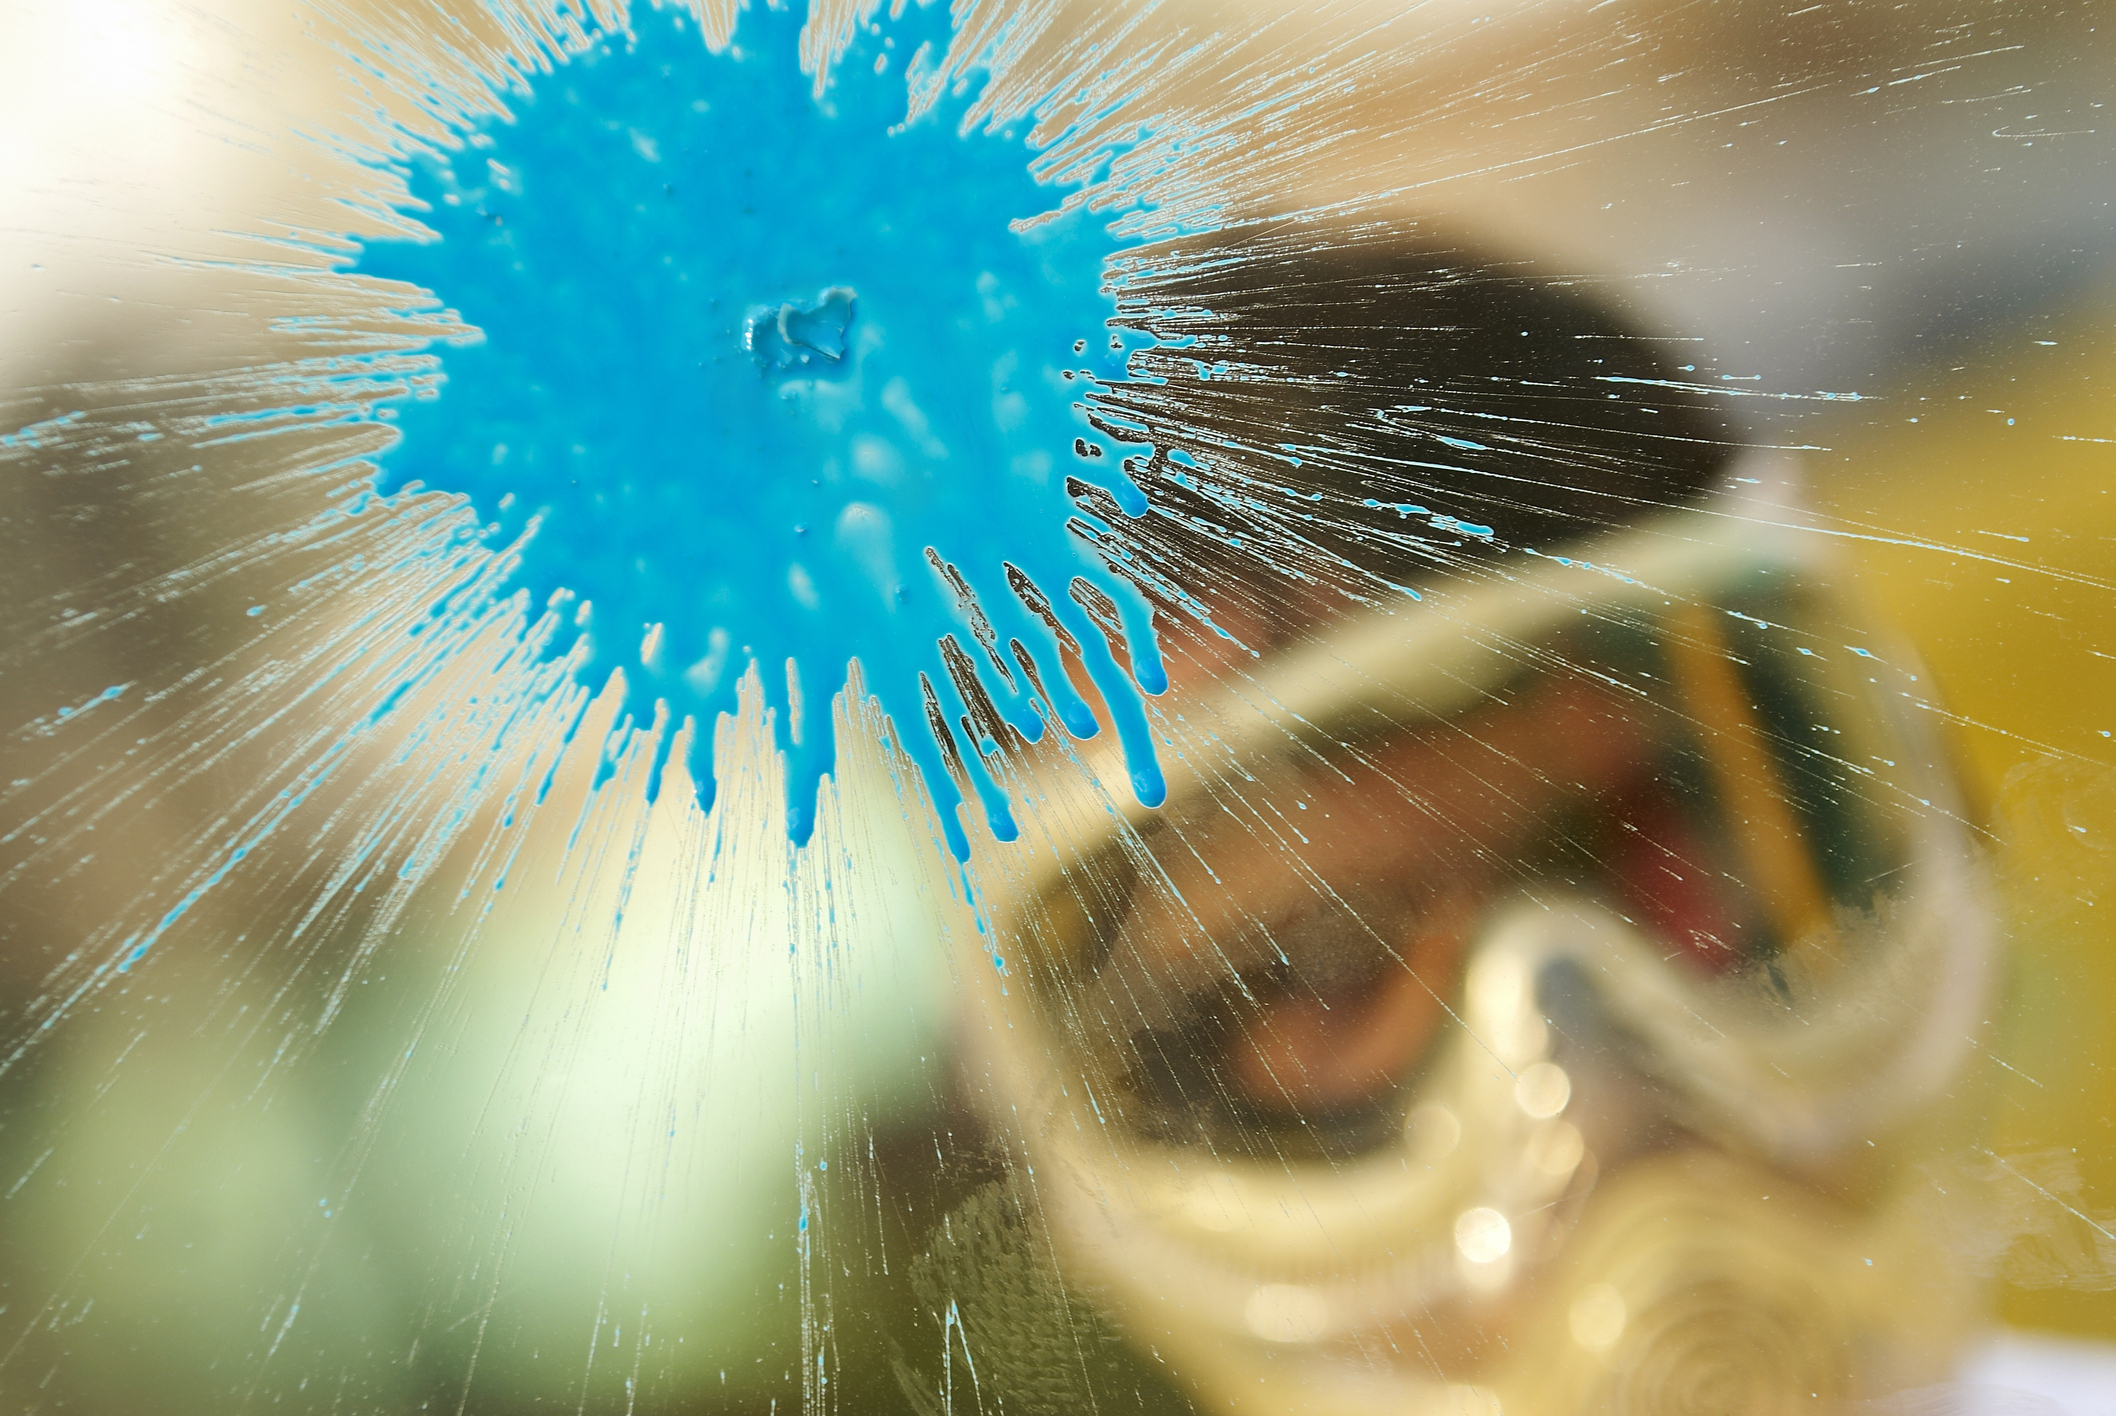 Paint splash on glass with person in protective gear visible through smear